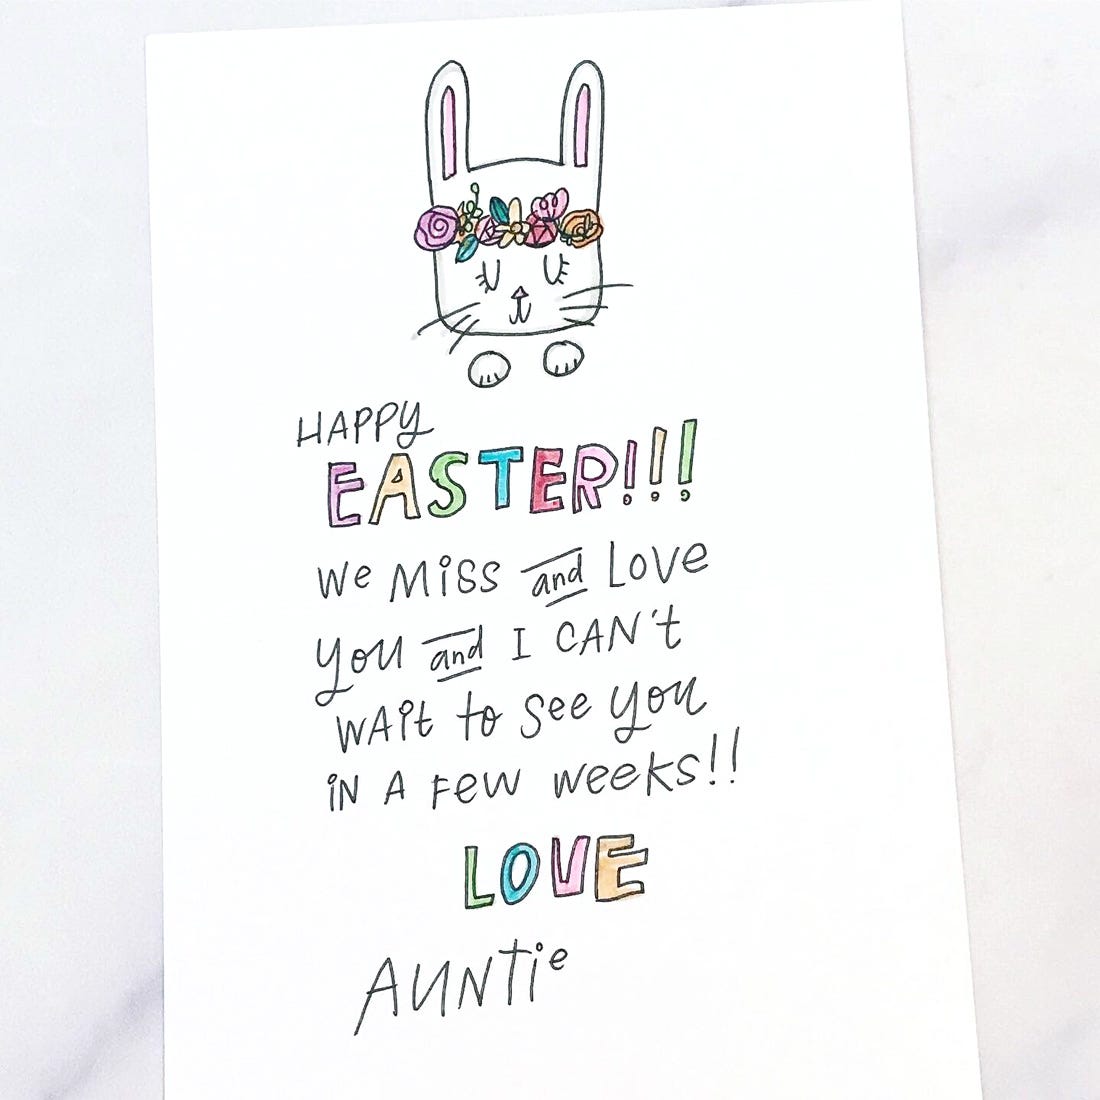 4 People Who'd Love an Easter Card, by Punkpost, Punkpost